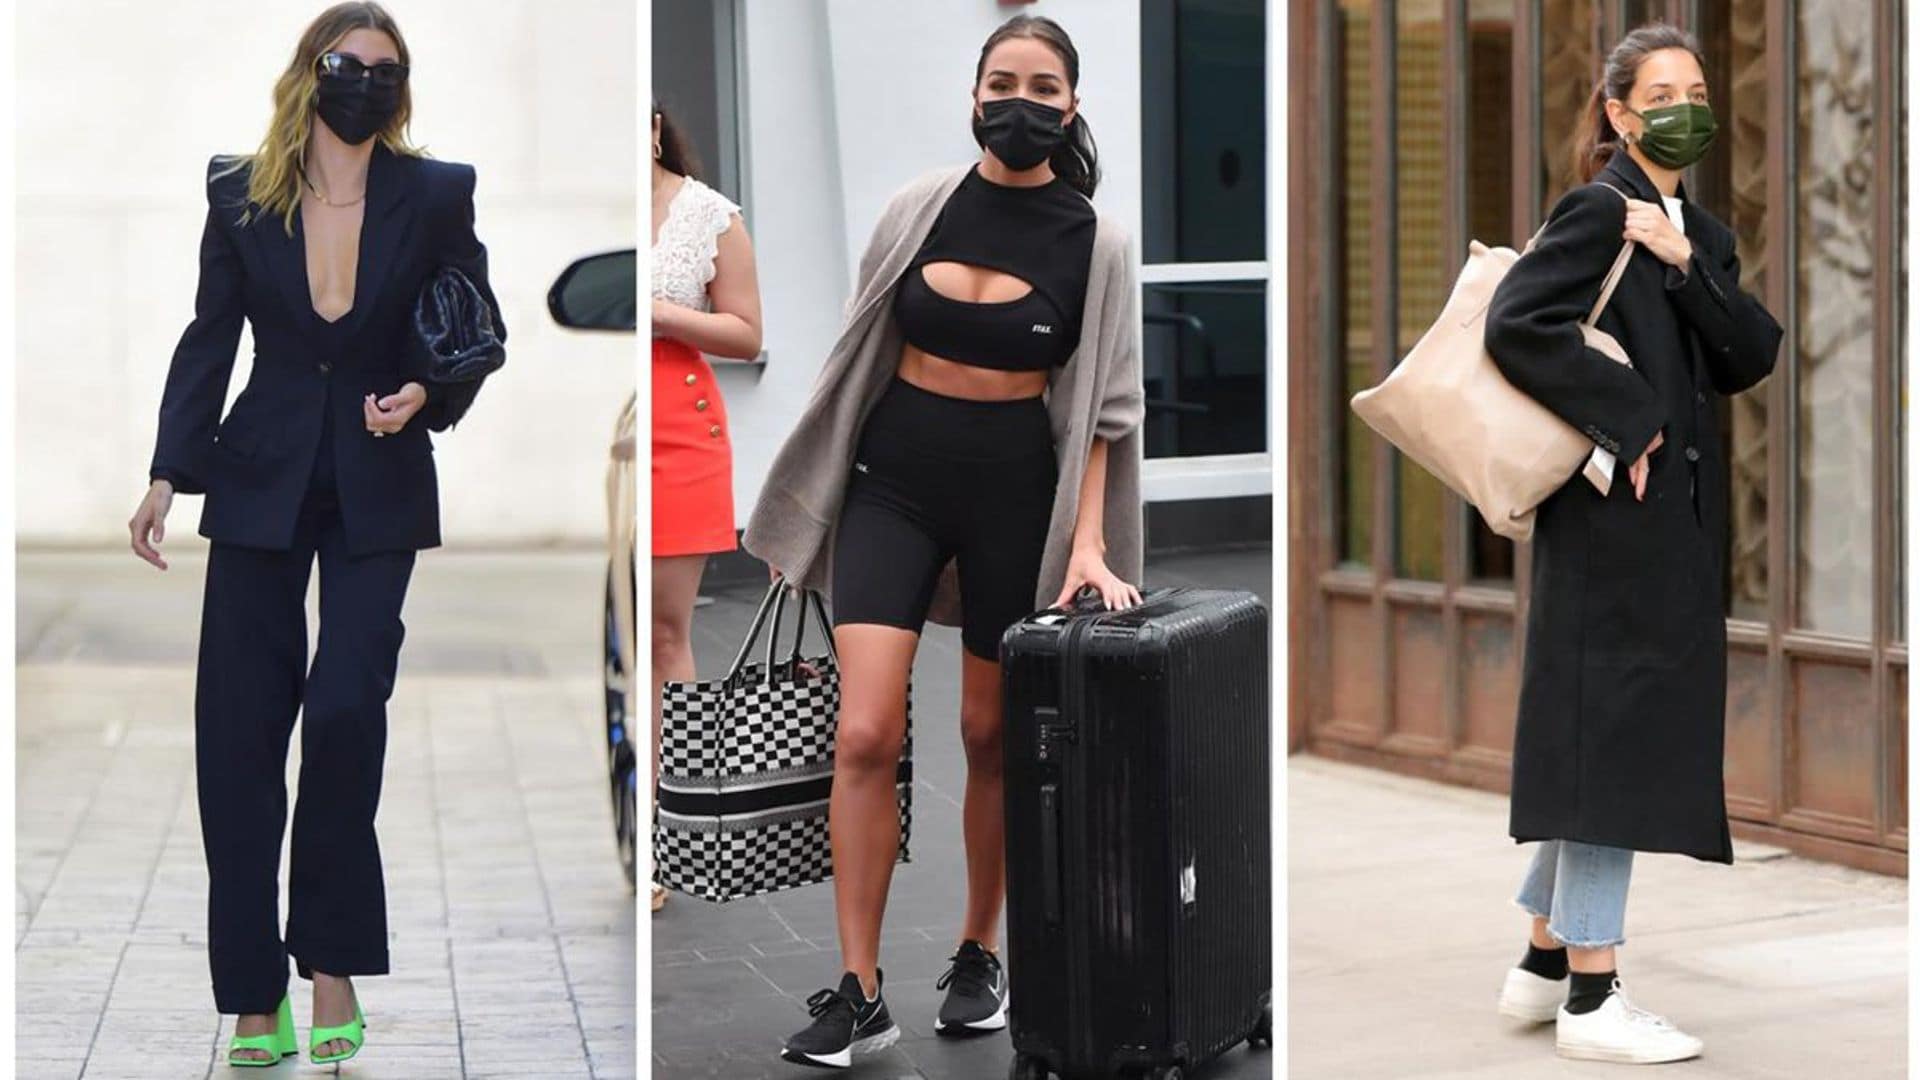 The top 10 celebrity style looks of the week - February 8